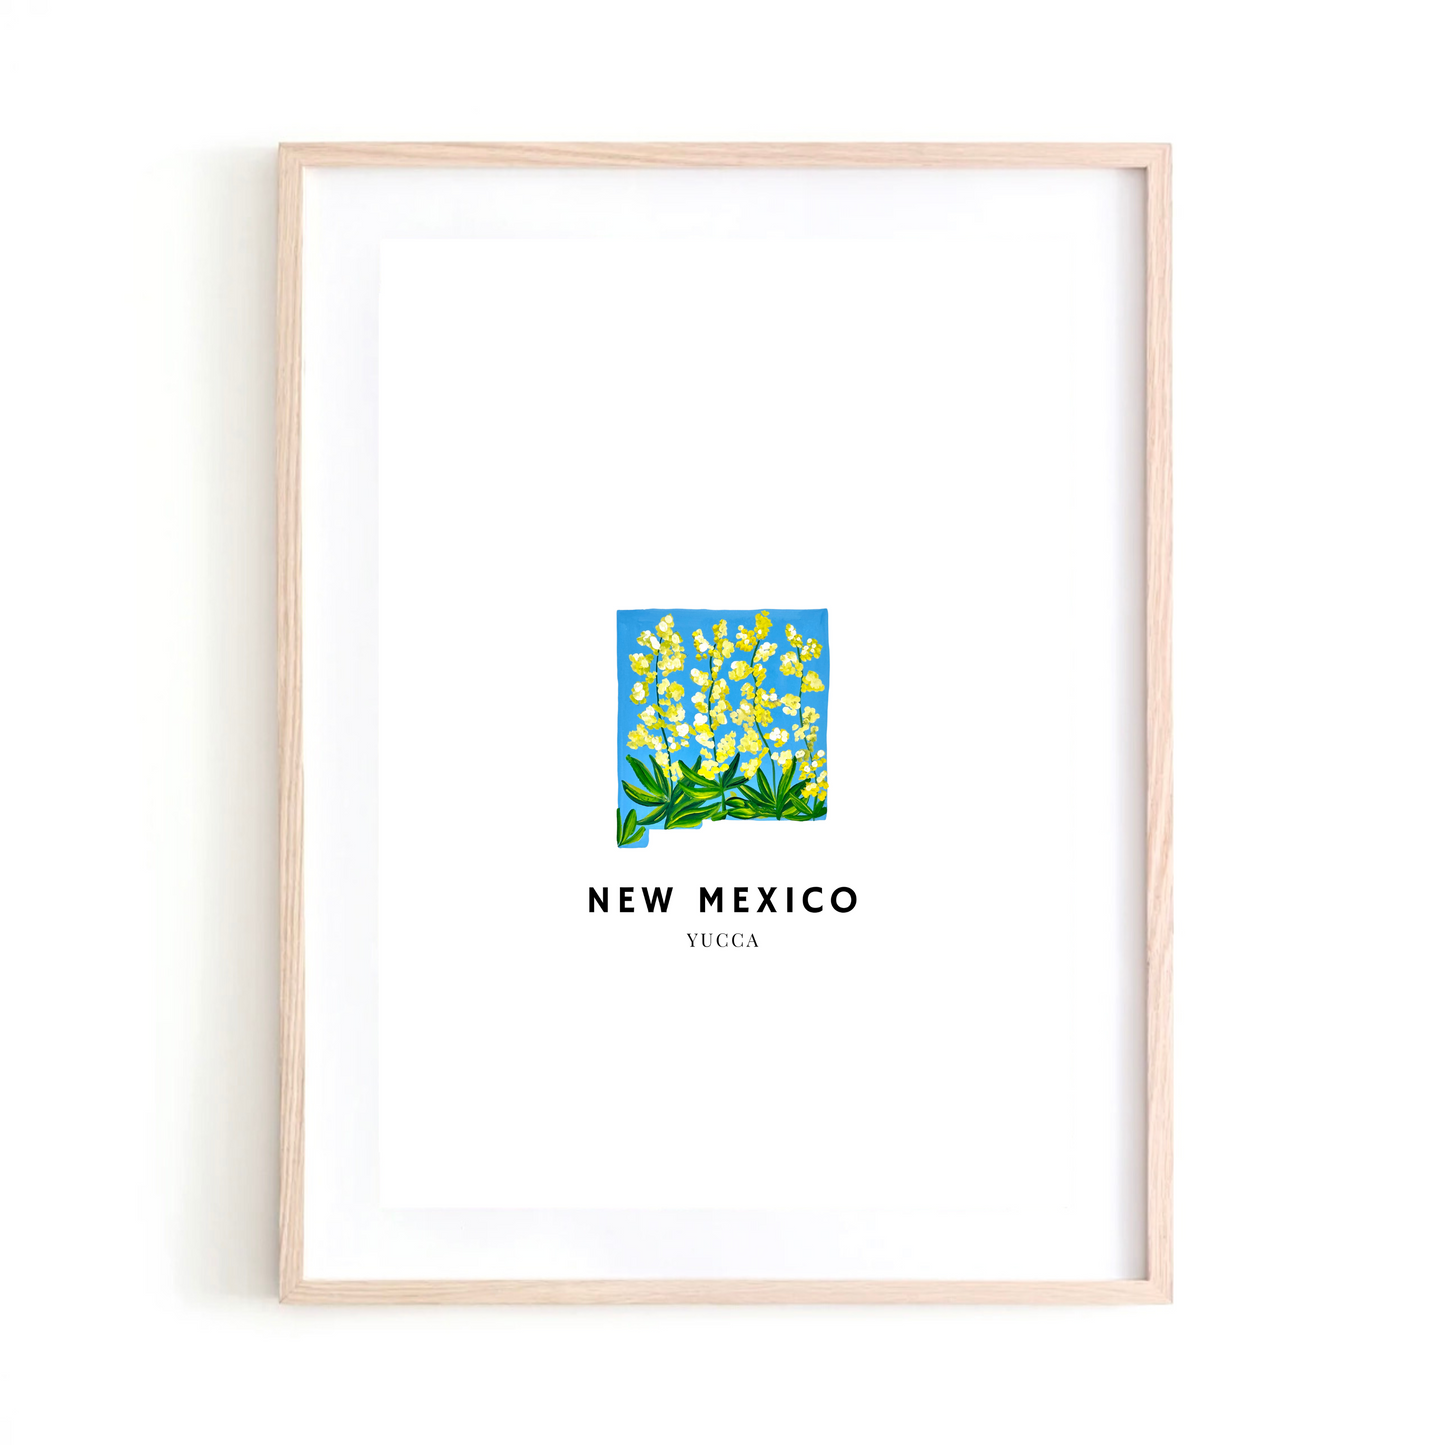 New Mexico State Flower art print